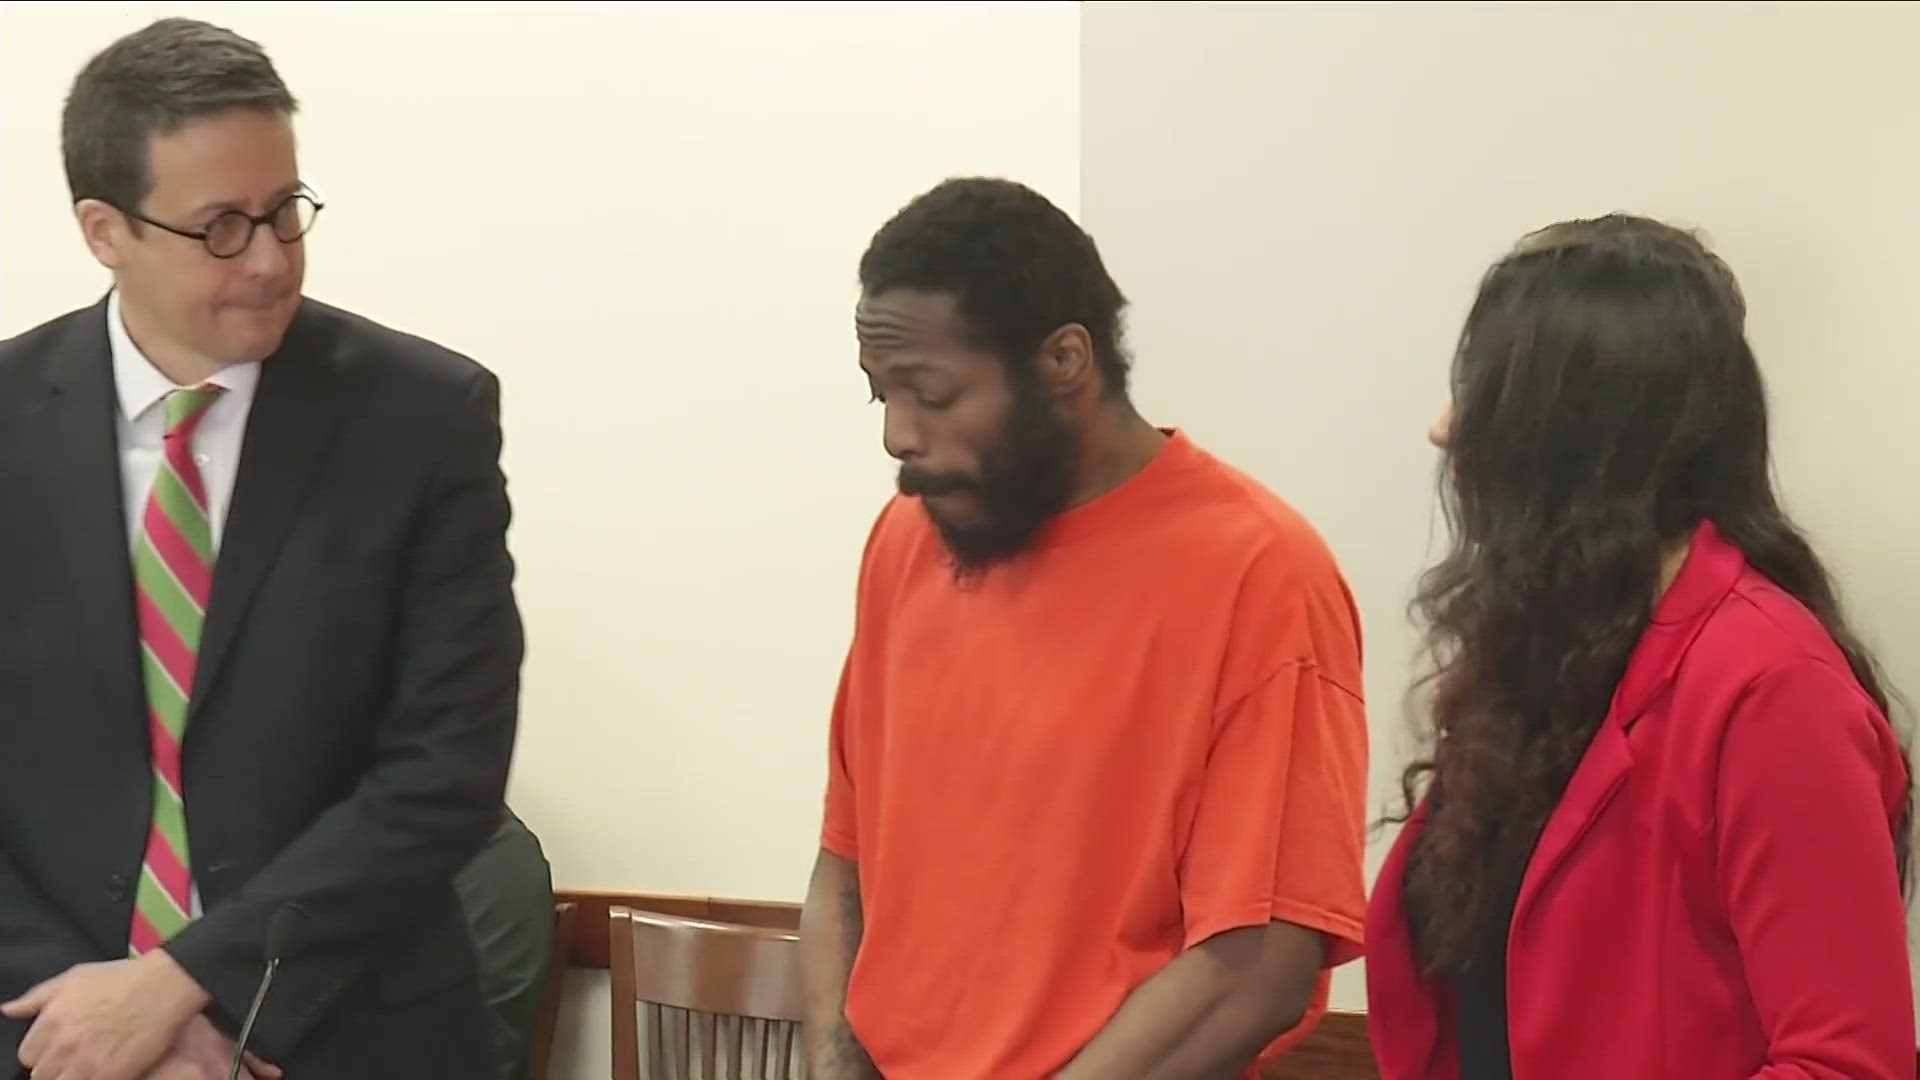 According to the Erie County district attorney's office 34-year-old Travis J. Green of Buffalo pled guilty to one count of Attempted Murder in the Second Degree.